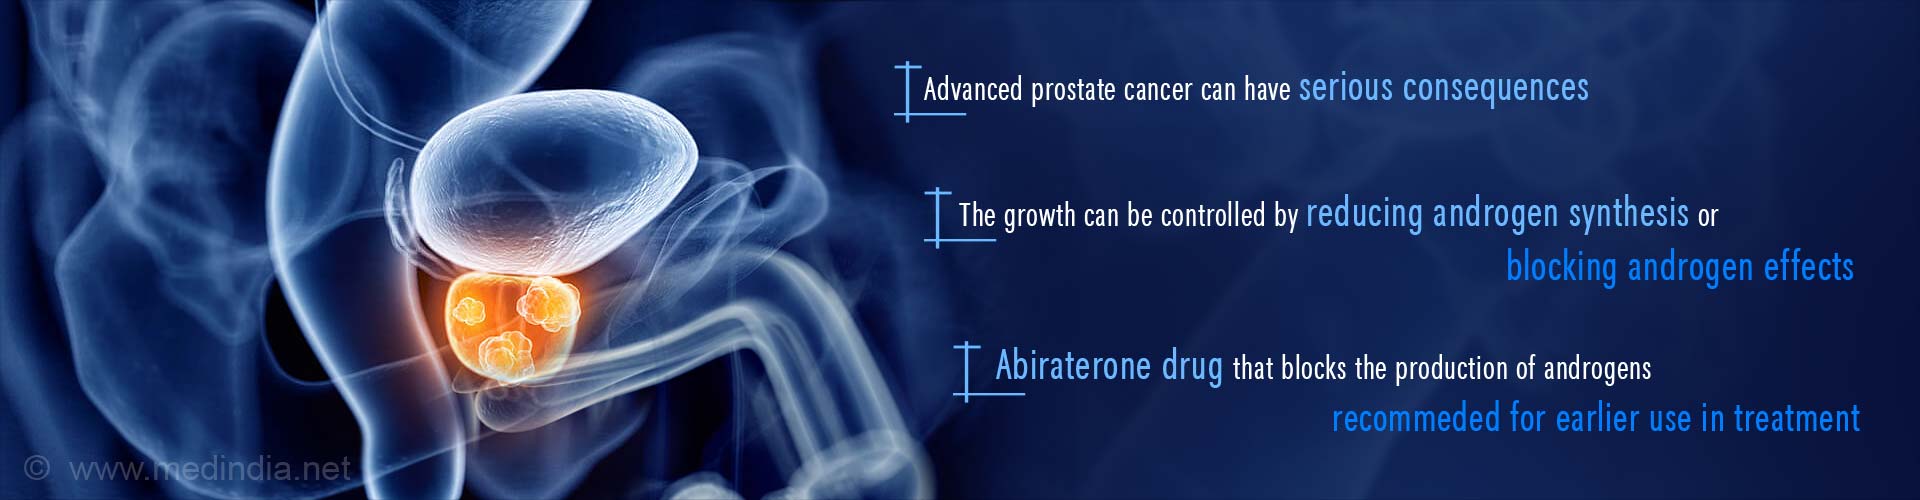  Advanced prostate cancer can have serious consequences
 The growth can be controlled by reducing androgen synthesis or blocking androgen effects
 Abiraterone drug that blocks the production of androgens recommended for earlier use in treatment